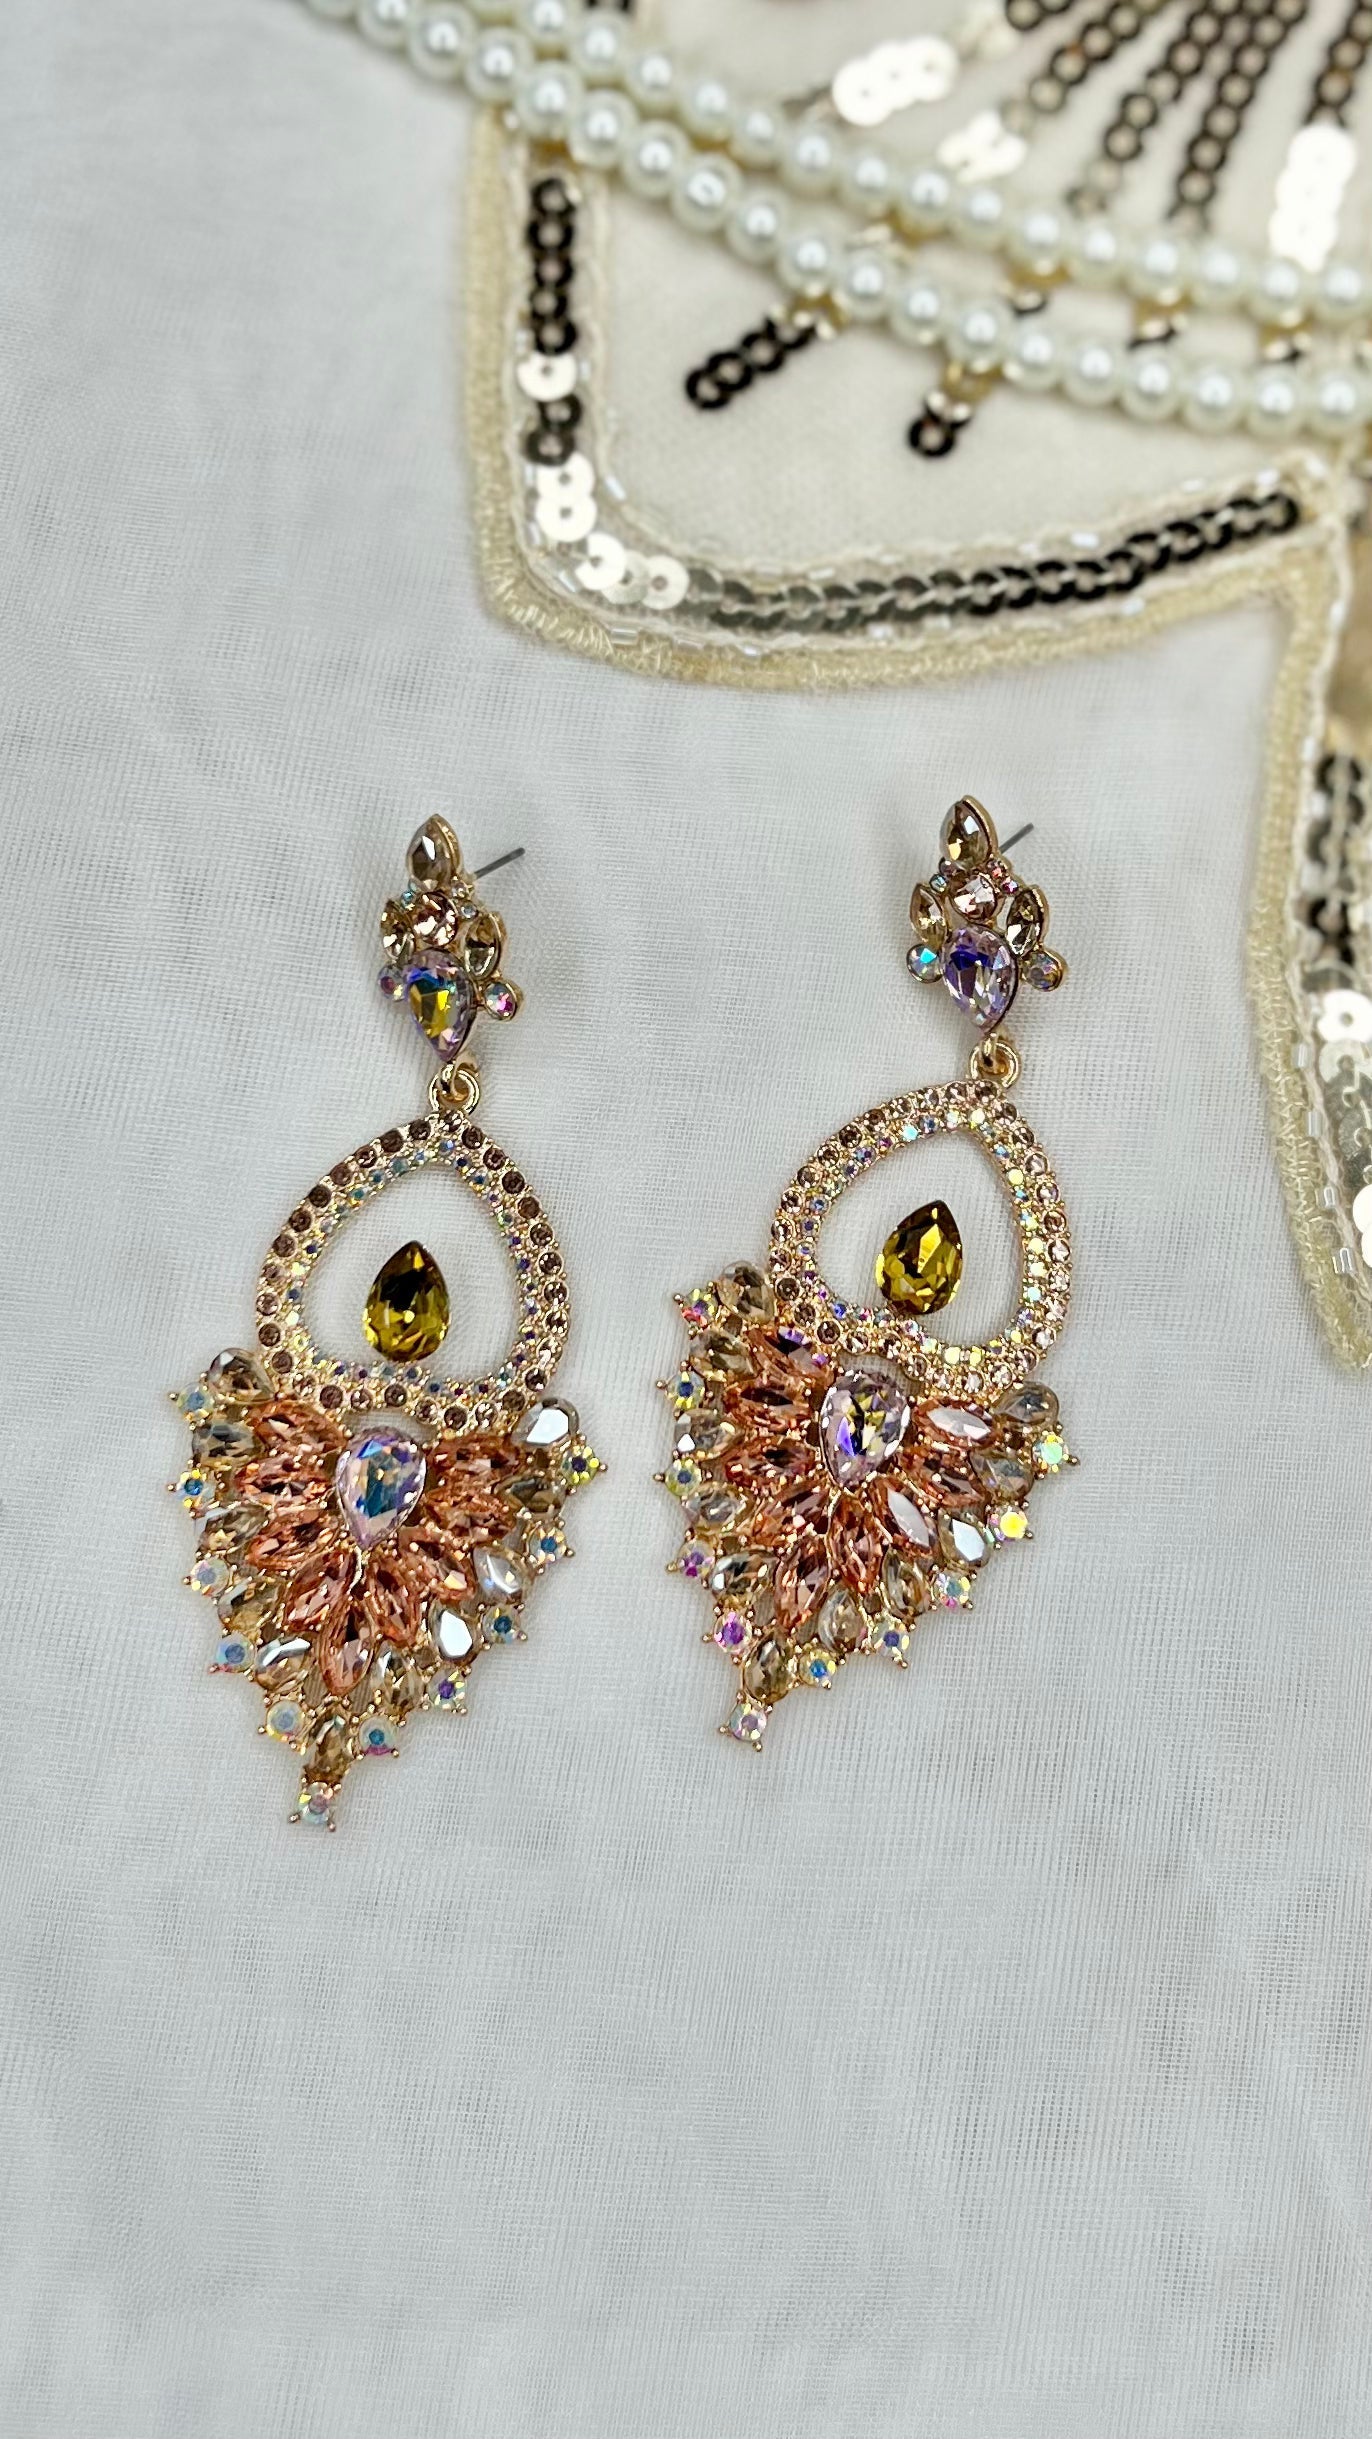 Gatsby Earrings - Peacock: Shop our stunning range of Gatsby inspired dangle earrings. Each pair is decorated with rhinestones ready to help you sparkle the night away
Material: alloy
Length:  - Ciao Bella Dresses 